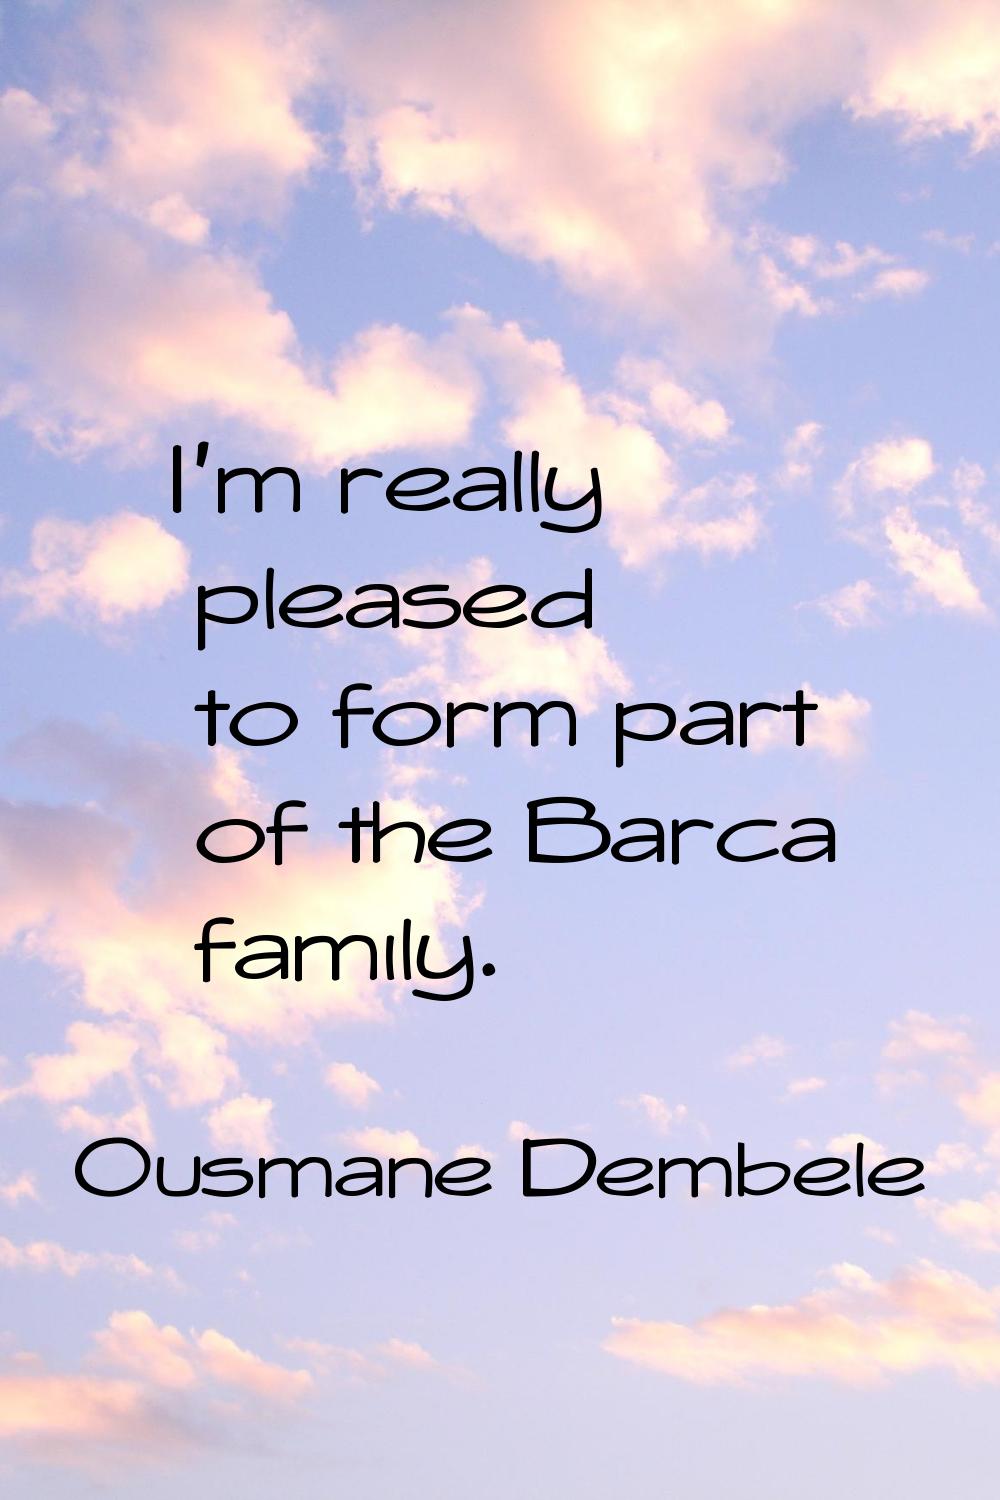 I'm really pleased to form part of the Barca family.